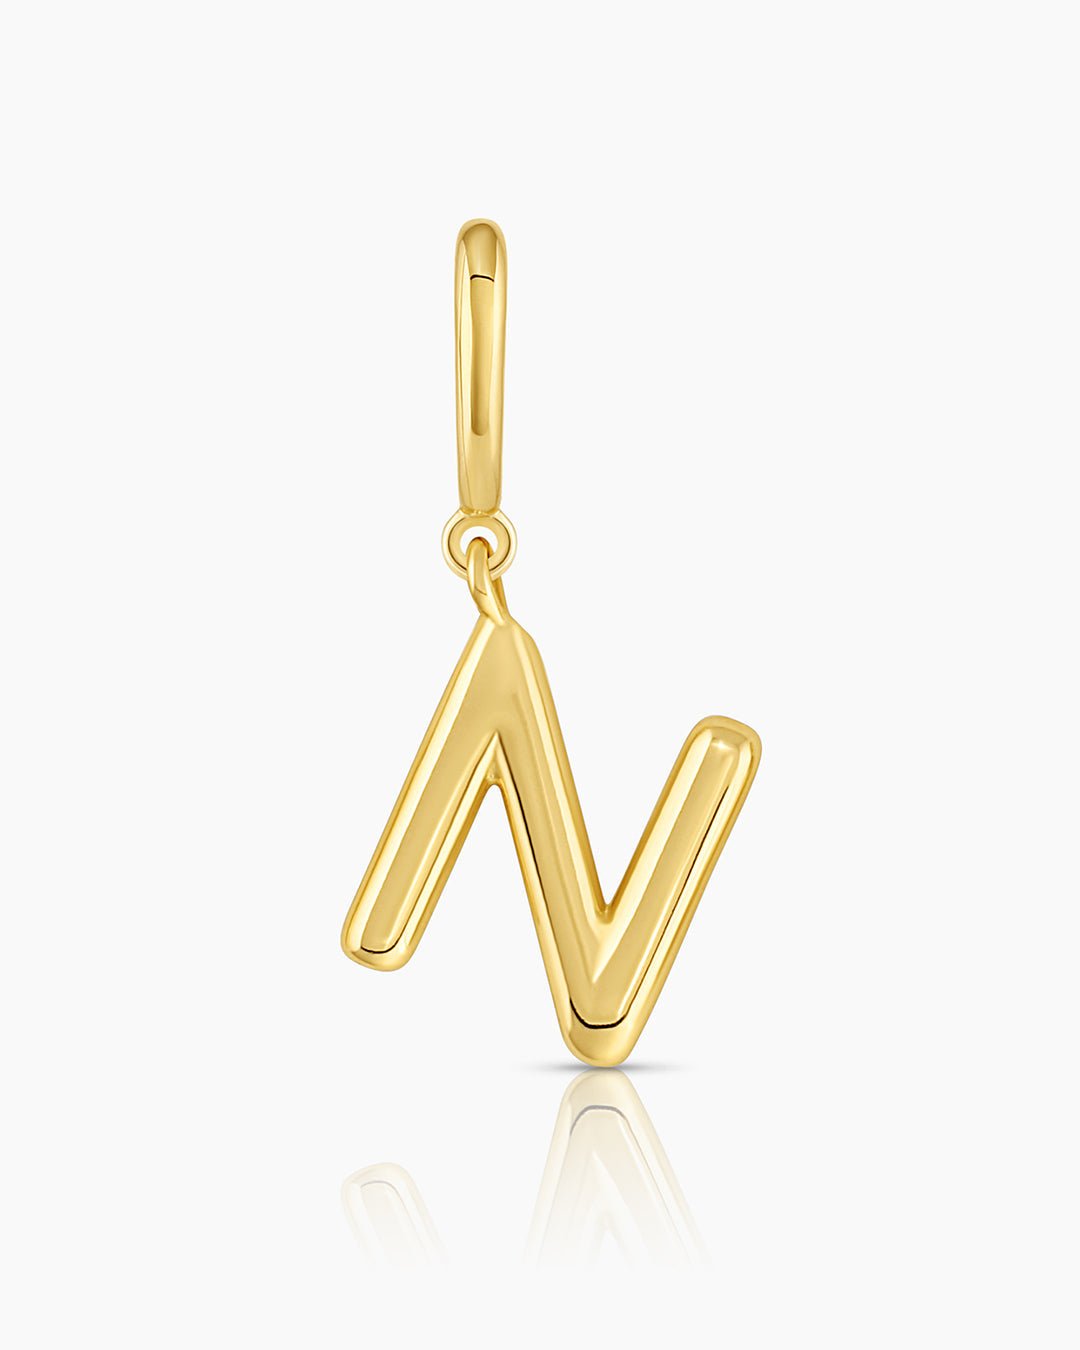 Alphabet Helium Parker Charm #N || option::Gold Plated, N